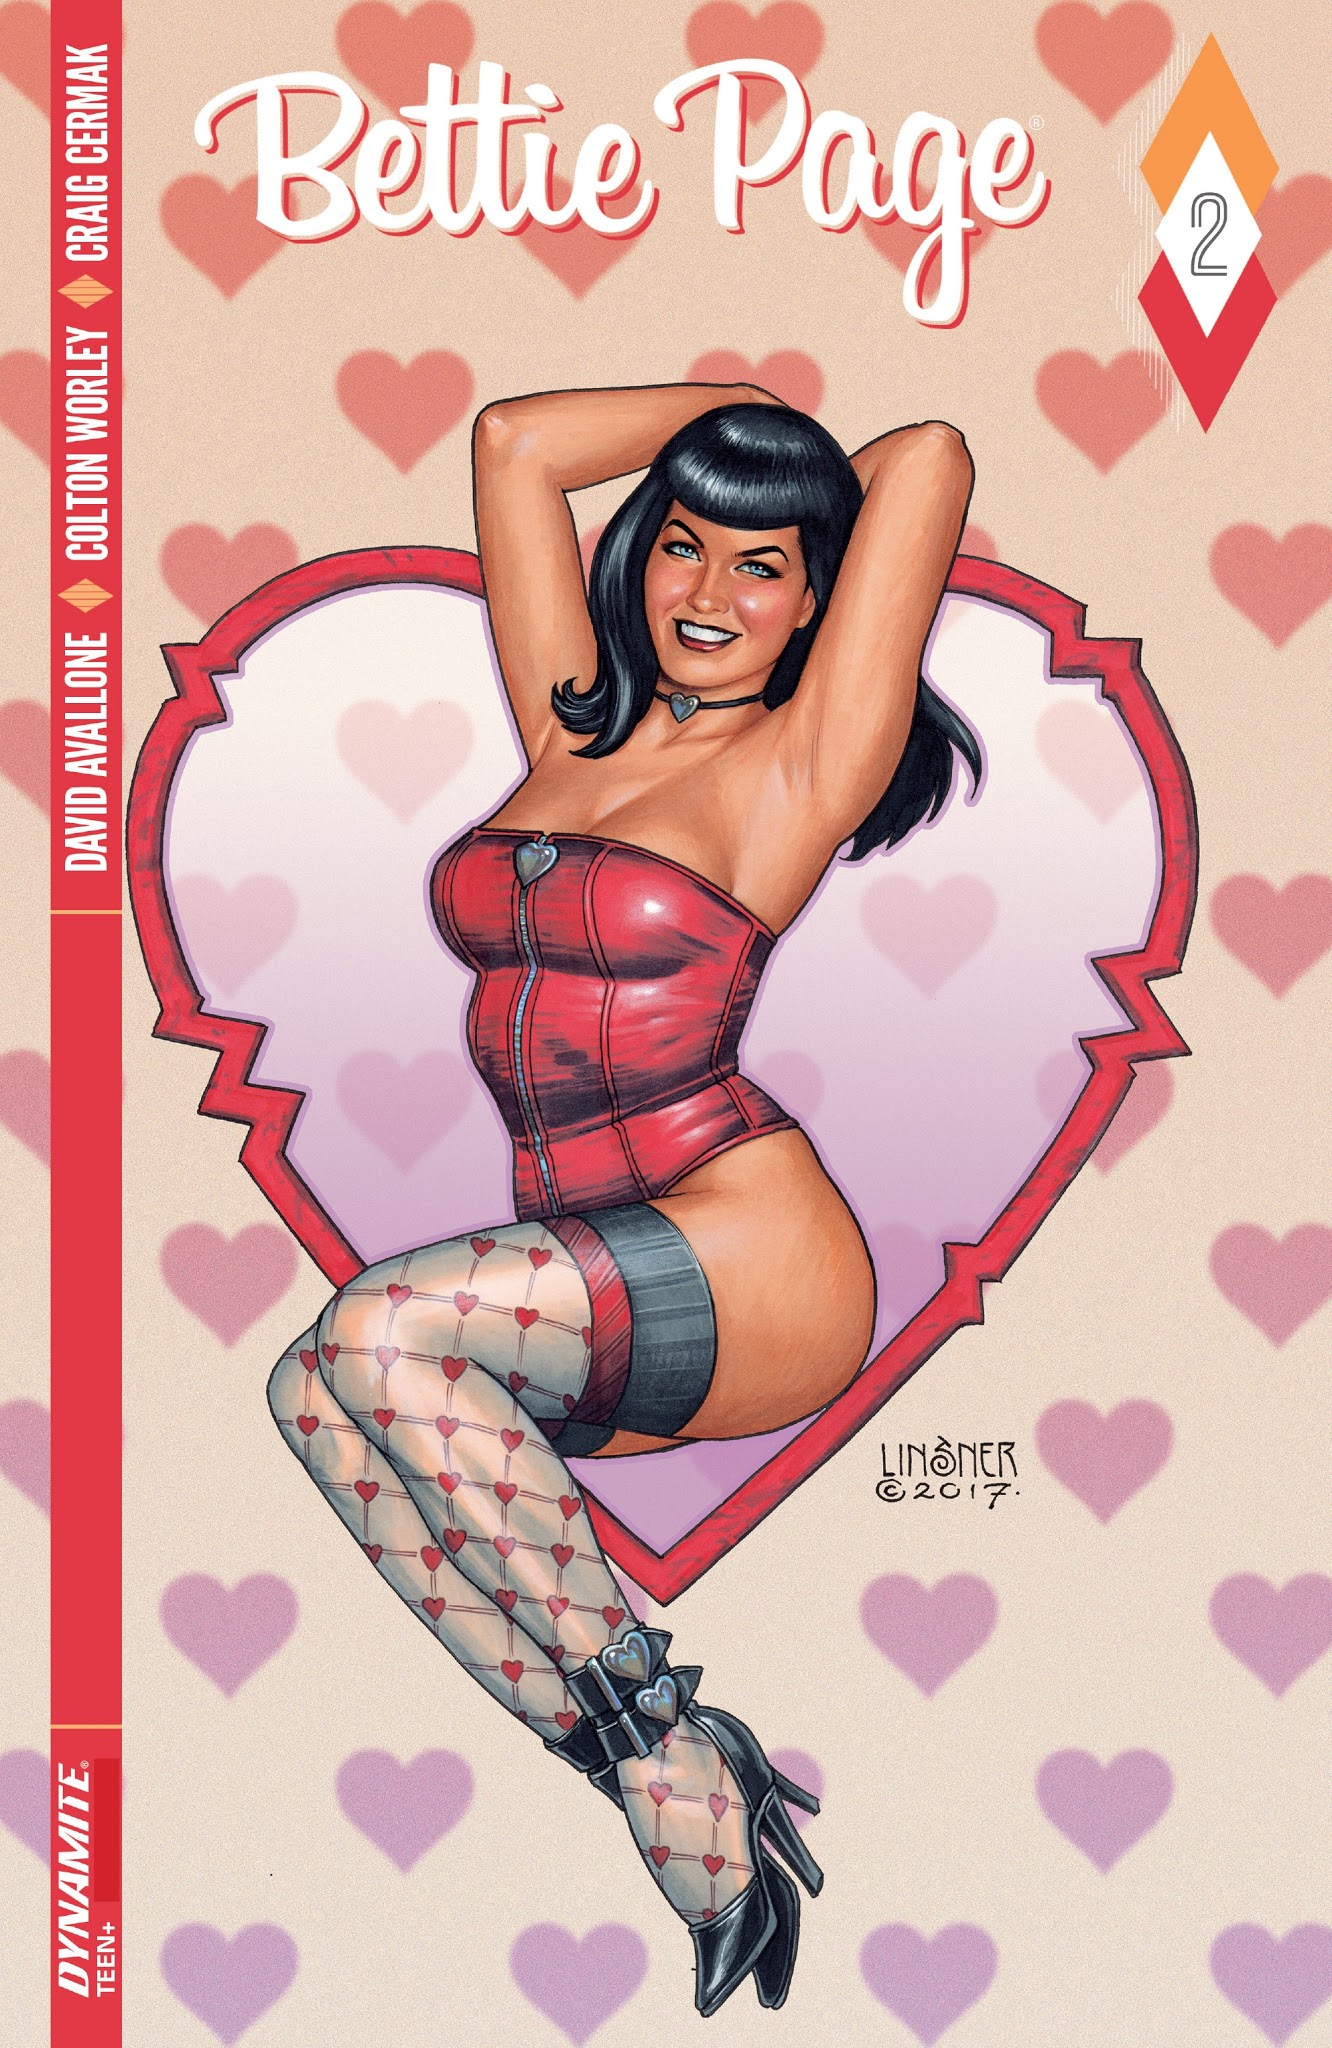 Read online Bettie Page comic -  Issue #2 - 1